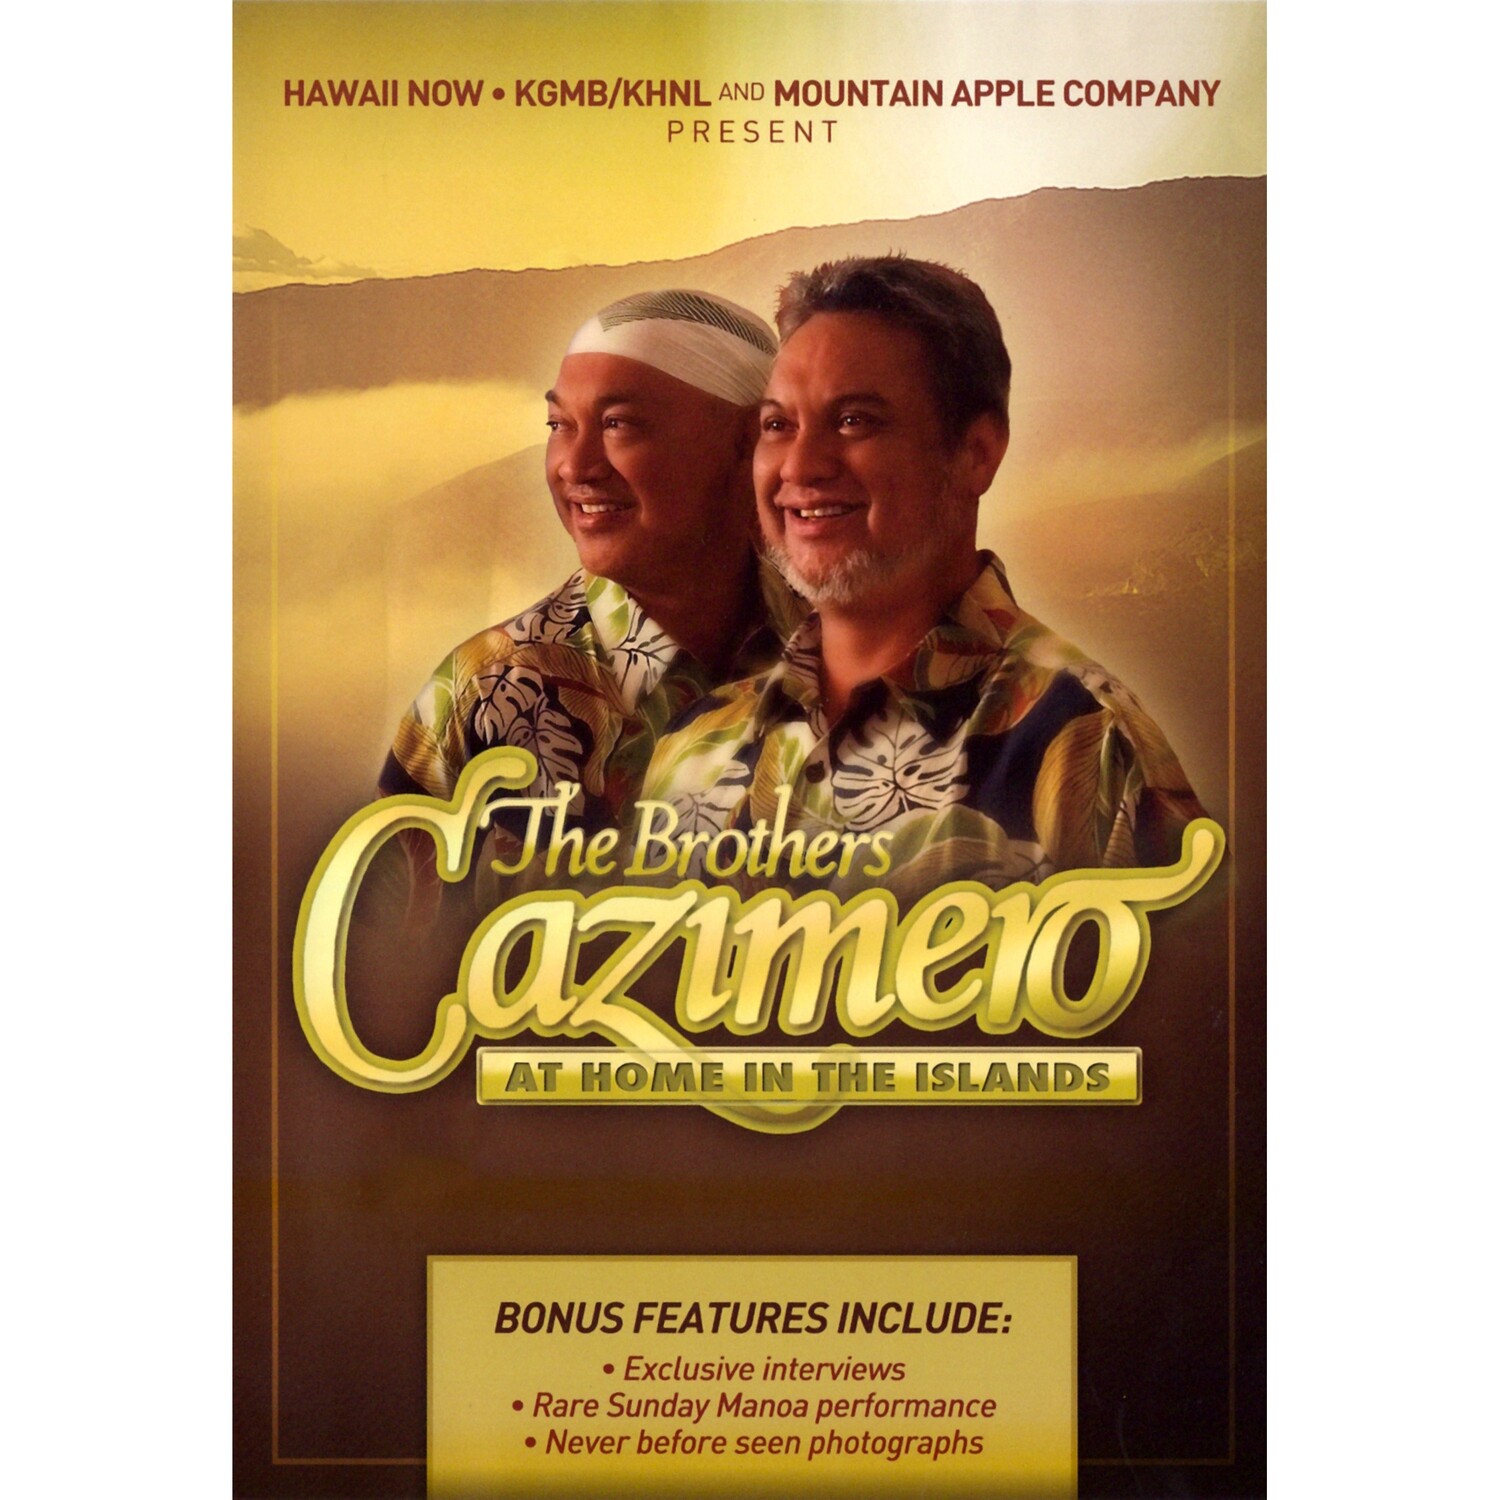 Brothers Cazimero DVD, "At Home in the Islands"